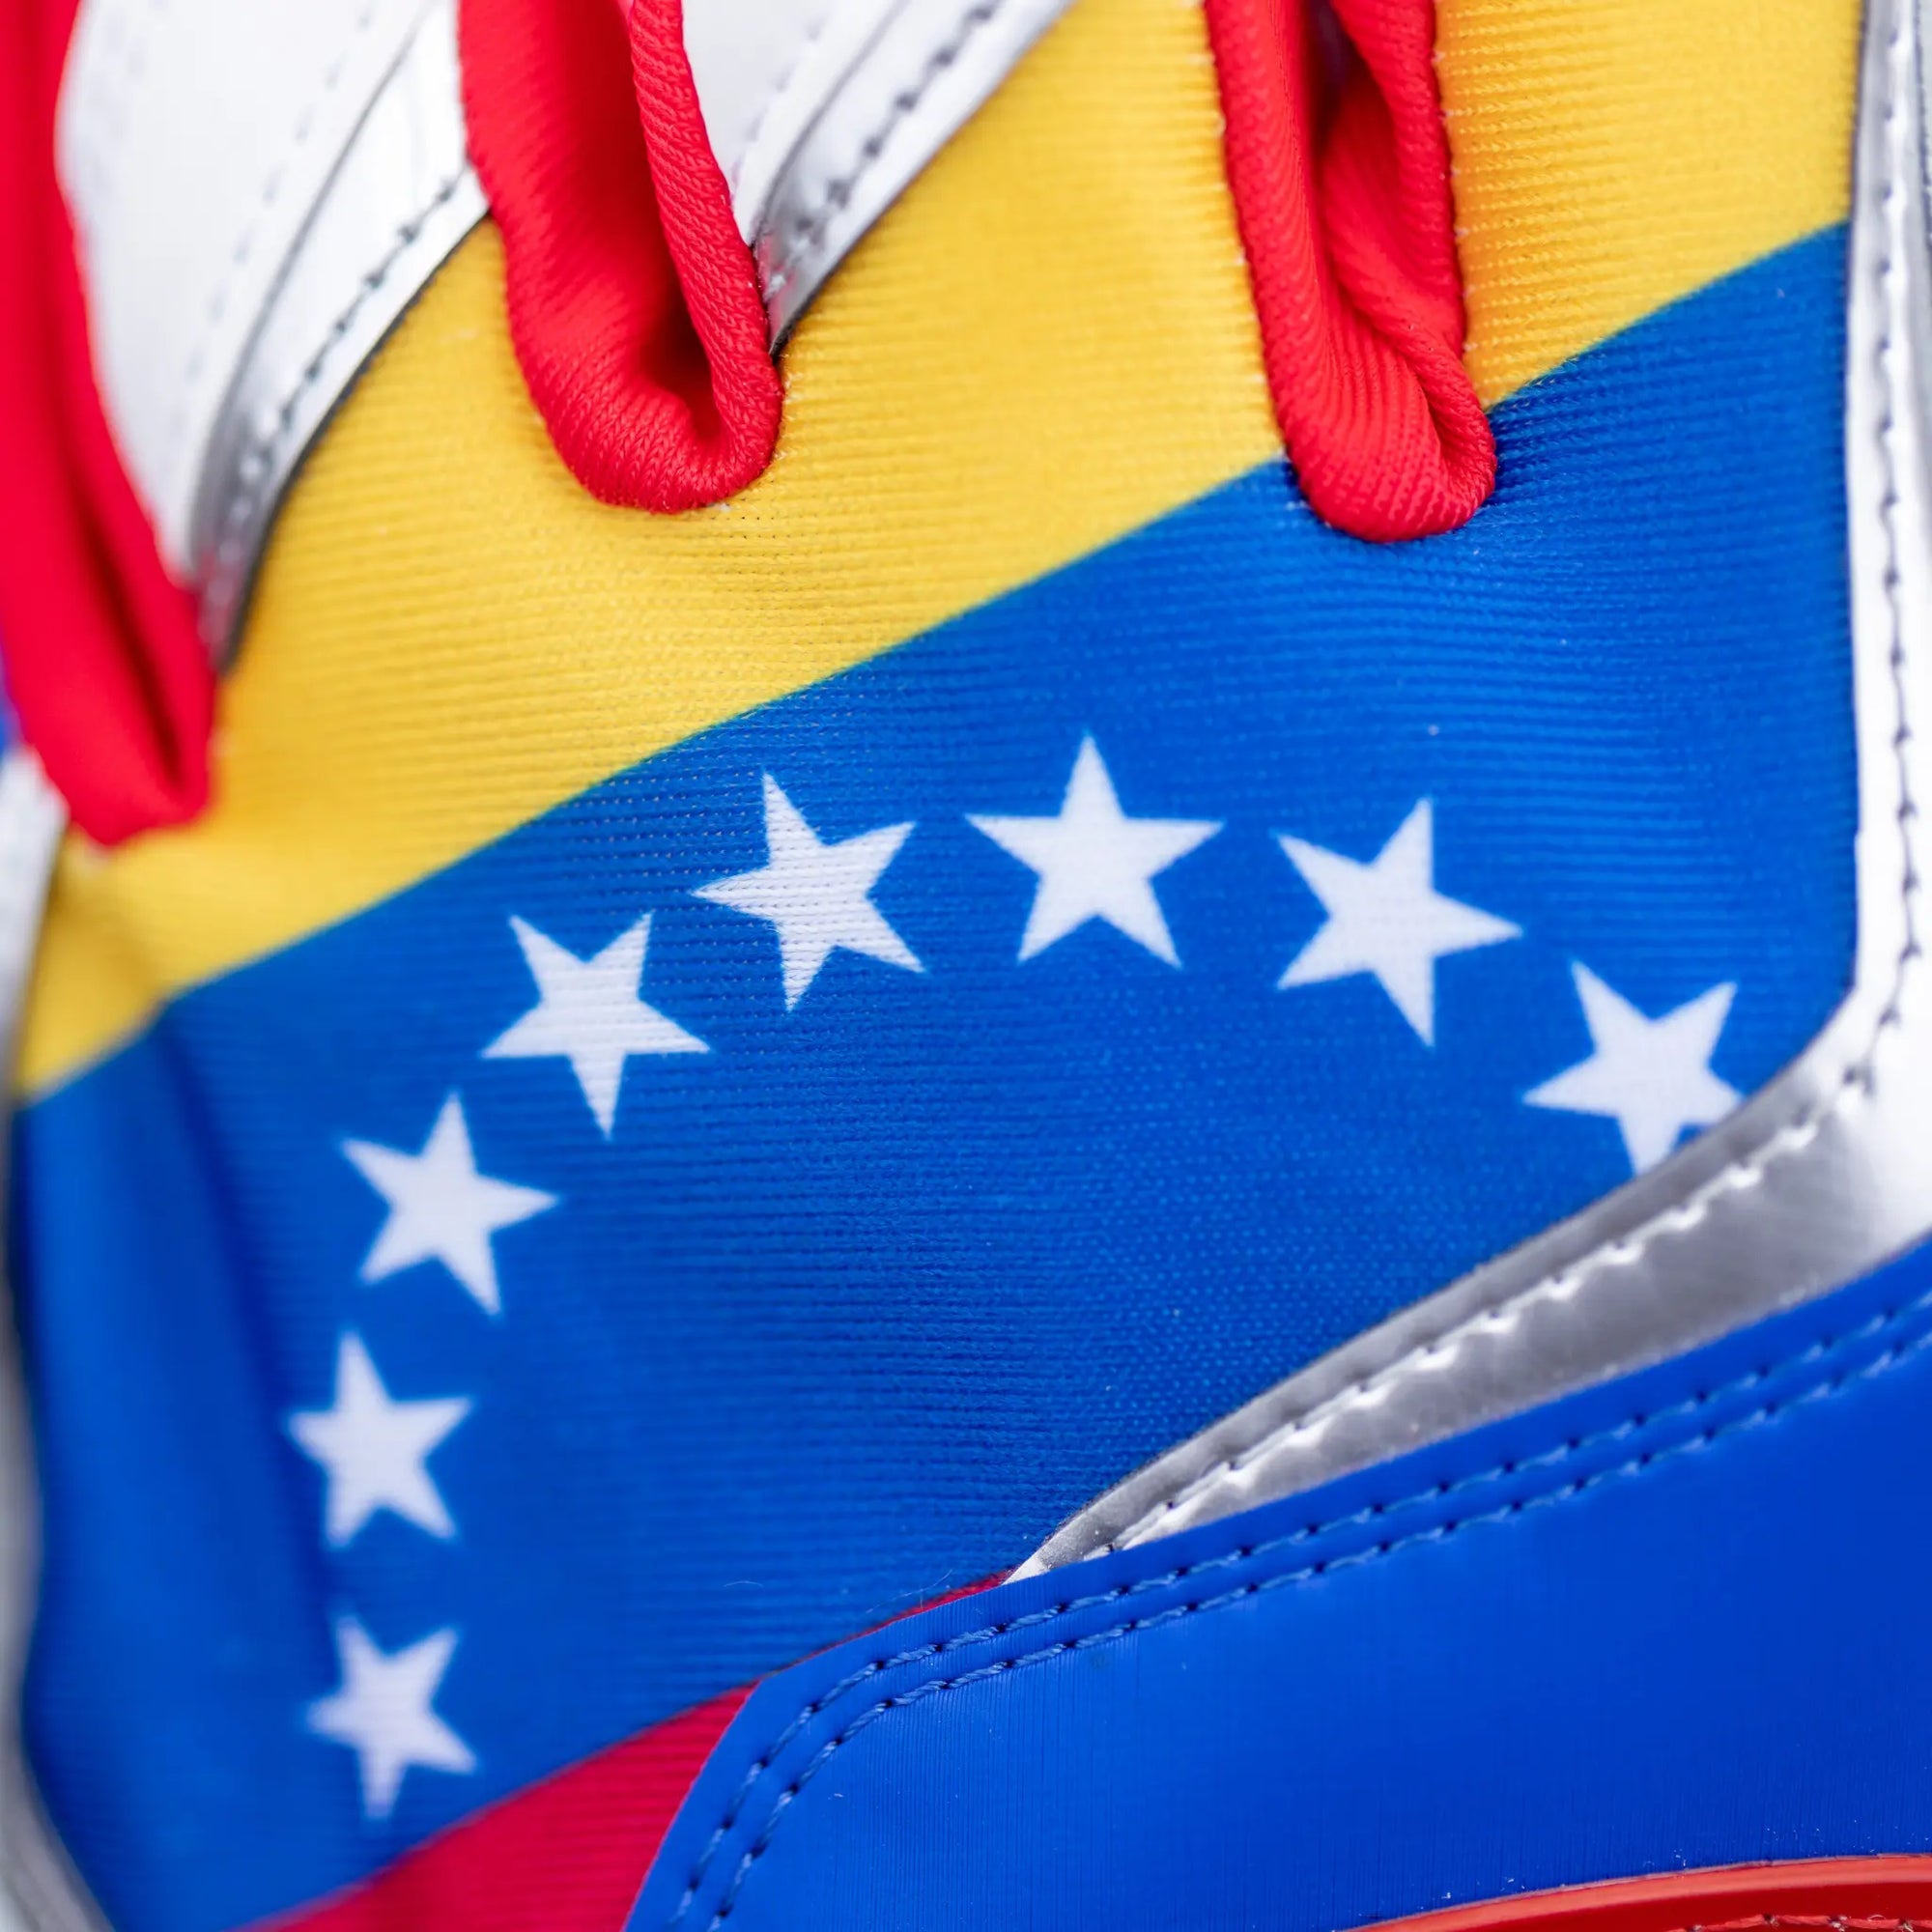 Adult-sized Tater Baseball batting gloves featuring a vibrant Venezuelan flag-inspired design with a blue, yellow, and red colorway, enhanced with a prominent Tater logo on the adjustable wrist strap, and a stylized 'TB' emblem on the back for a patriotic and performance-oriented look.